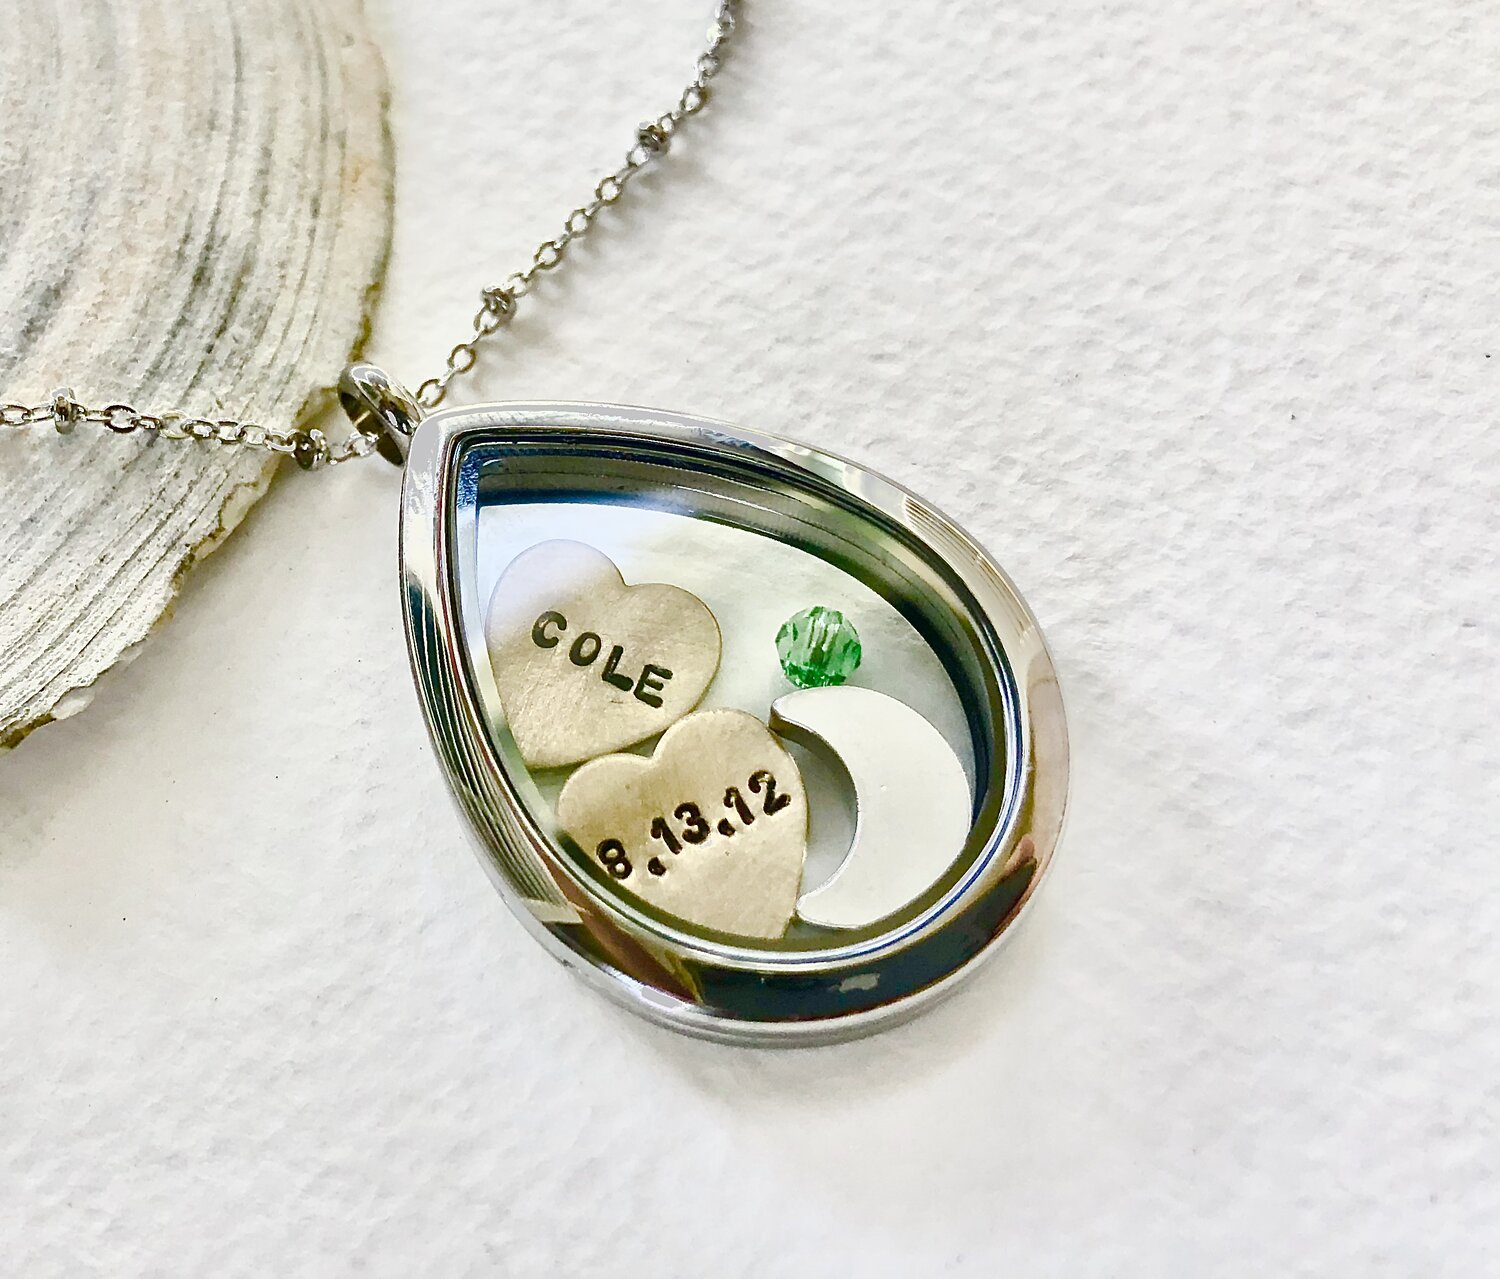 GSBSCSM Custom/ Necklace Living Memory Floating Pendant Necklace Personalized Family Floating Crystal Living Locket